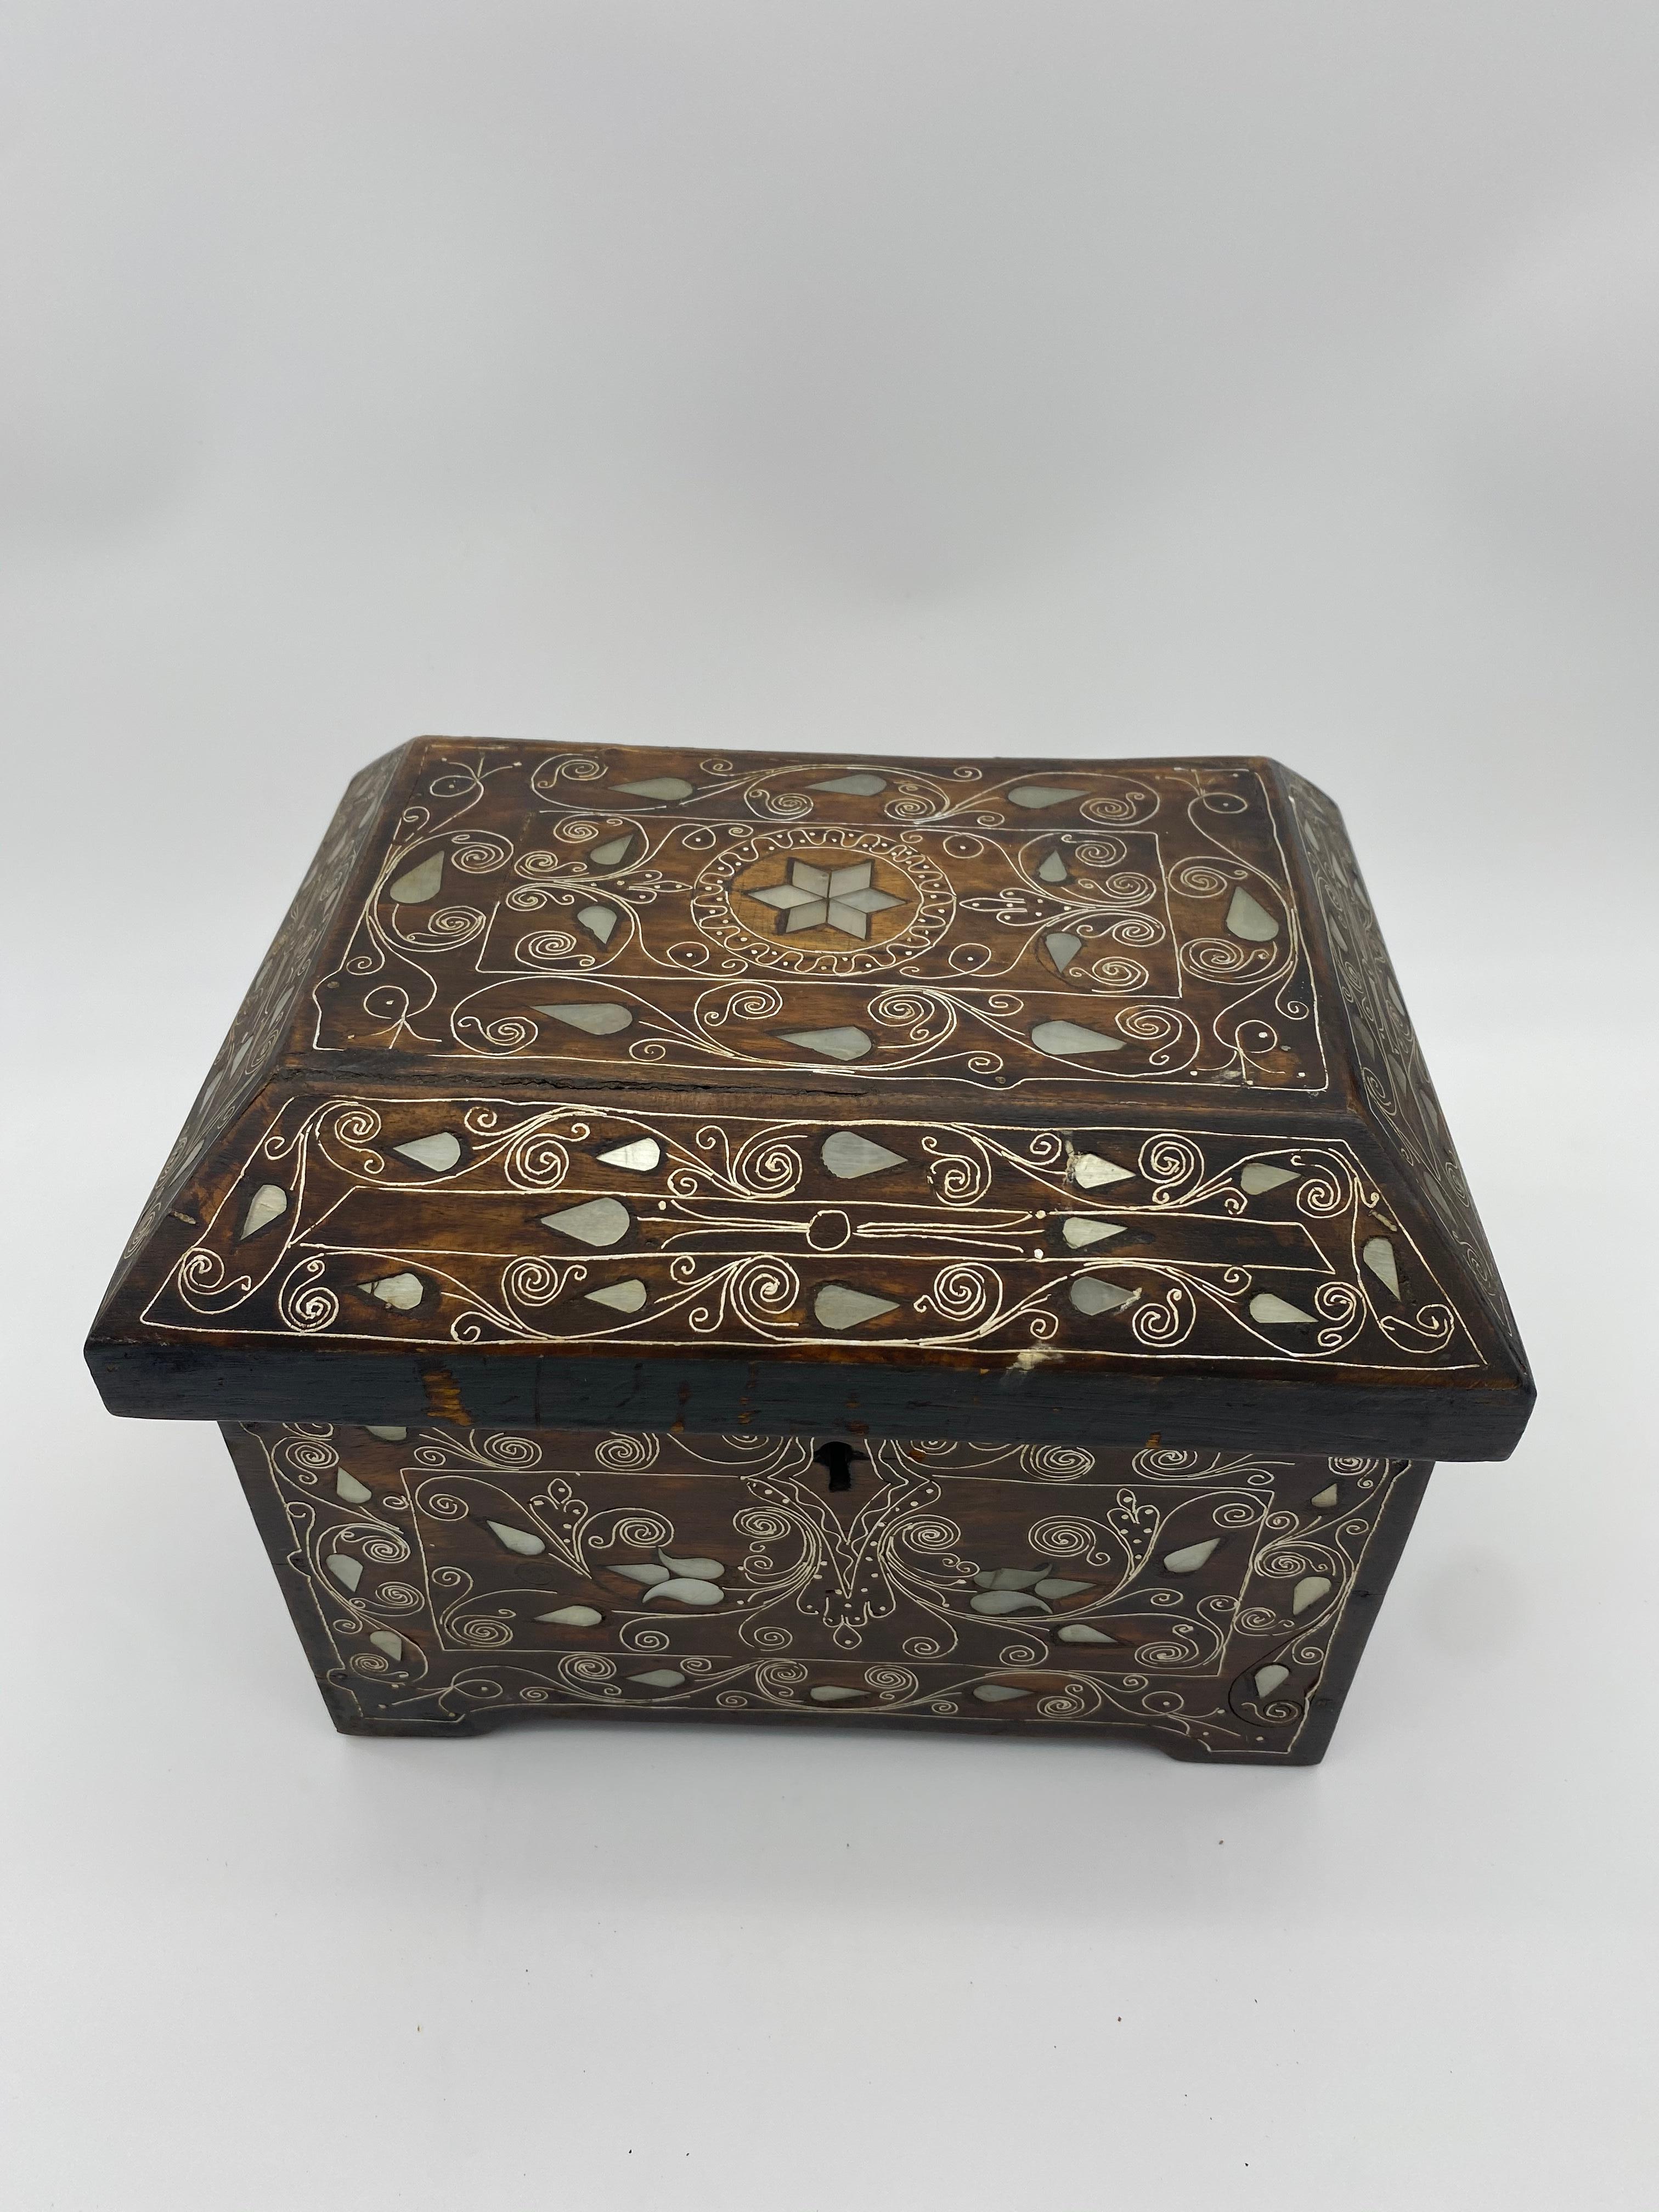 19th century Chinese silverwire wooden box with mother of pearl design from the Qing Dynasty. Beautiful intricate floral designs all-over.